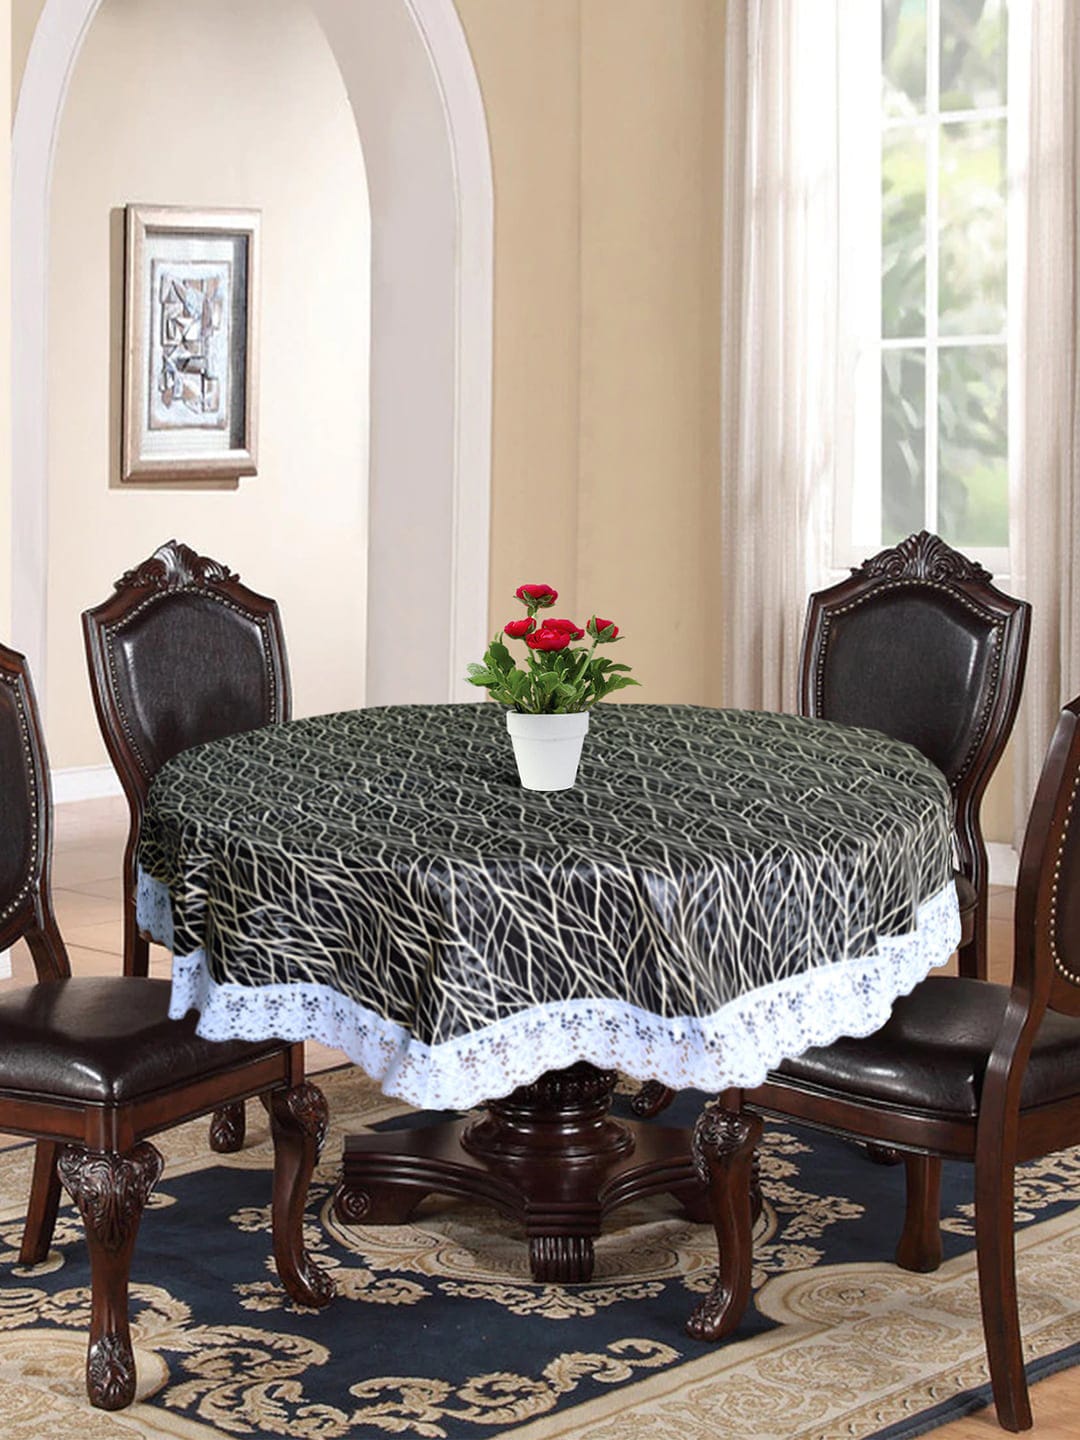 Kuber Industries Black & Off-White Printed 4-Seater Table Cover Price in India